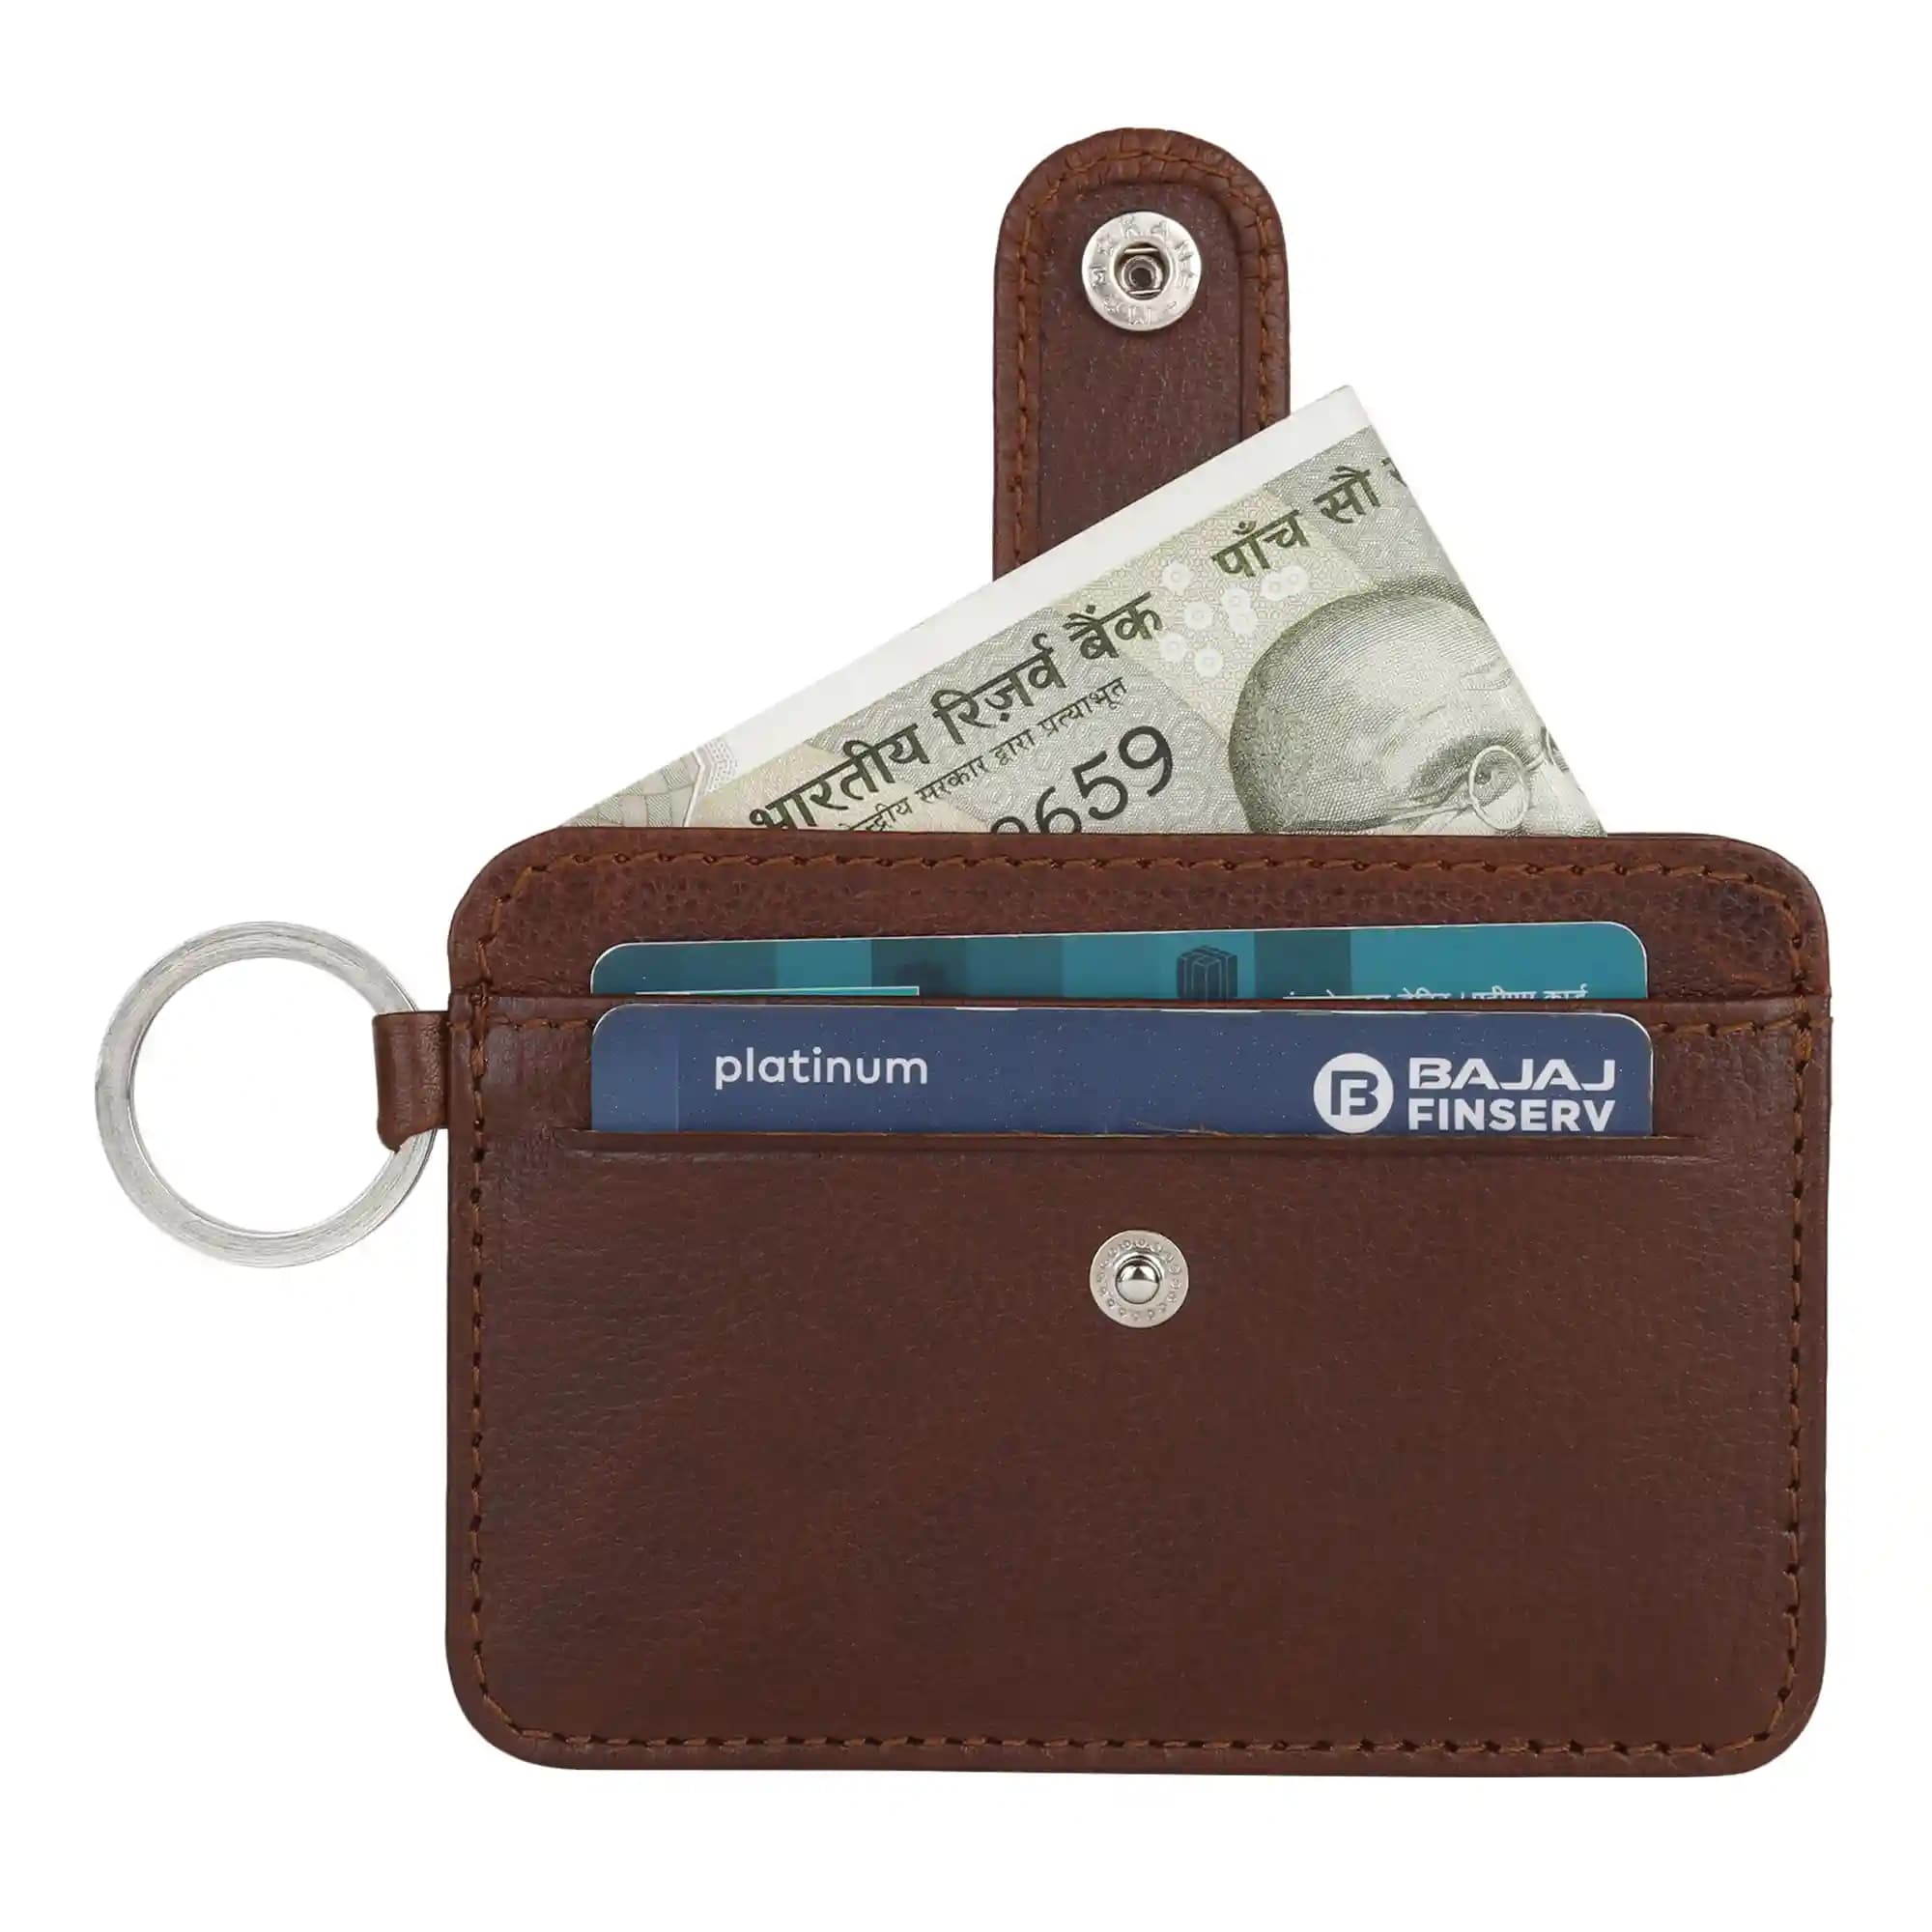 Leather Credit & Visiting Card, Money Pouch